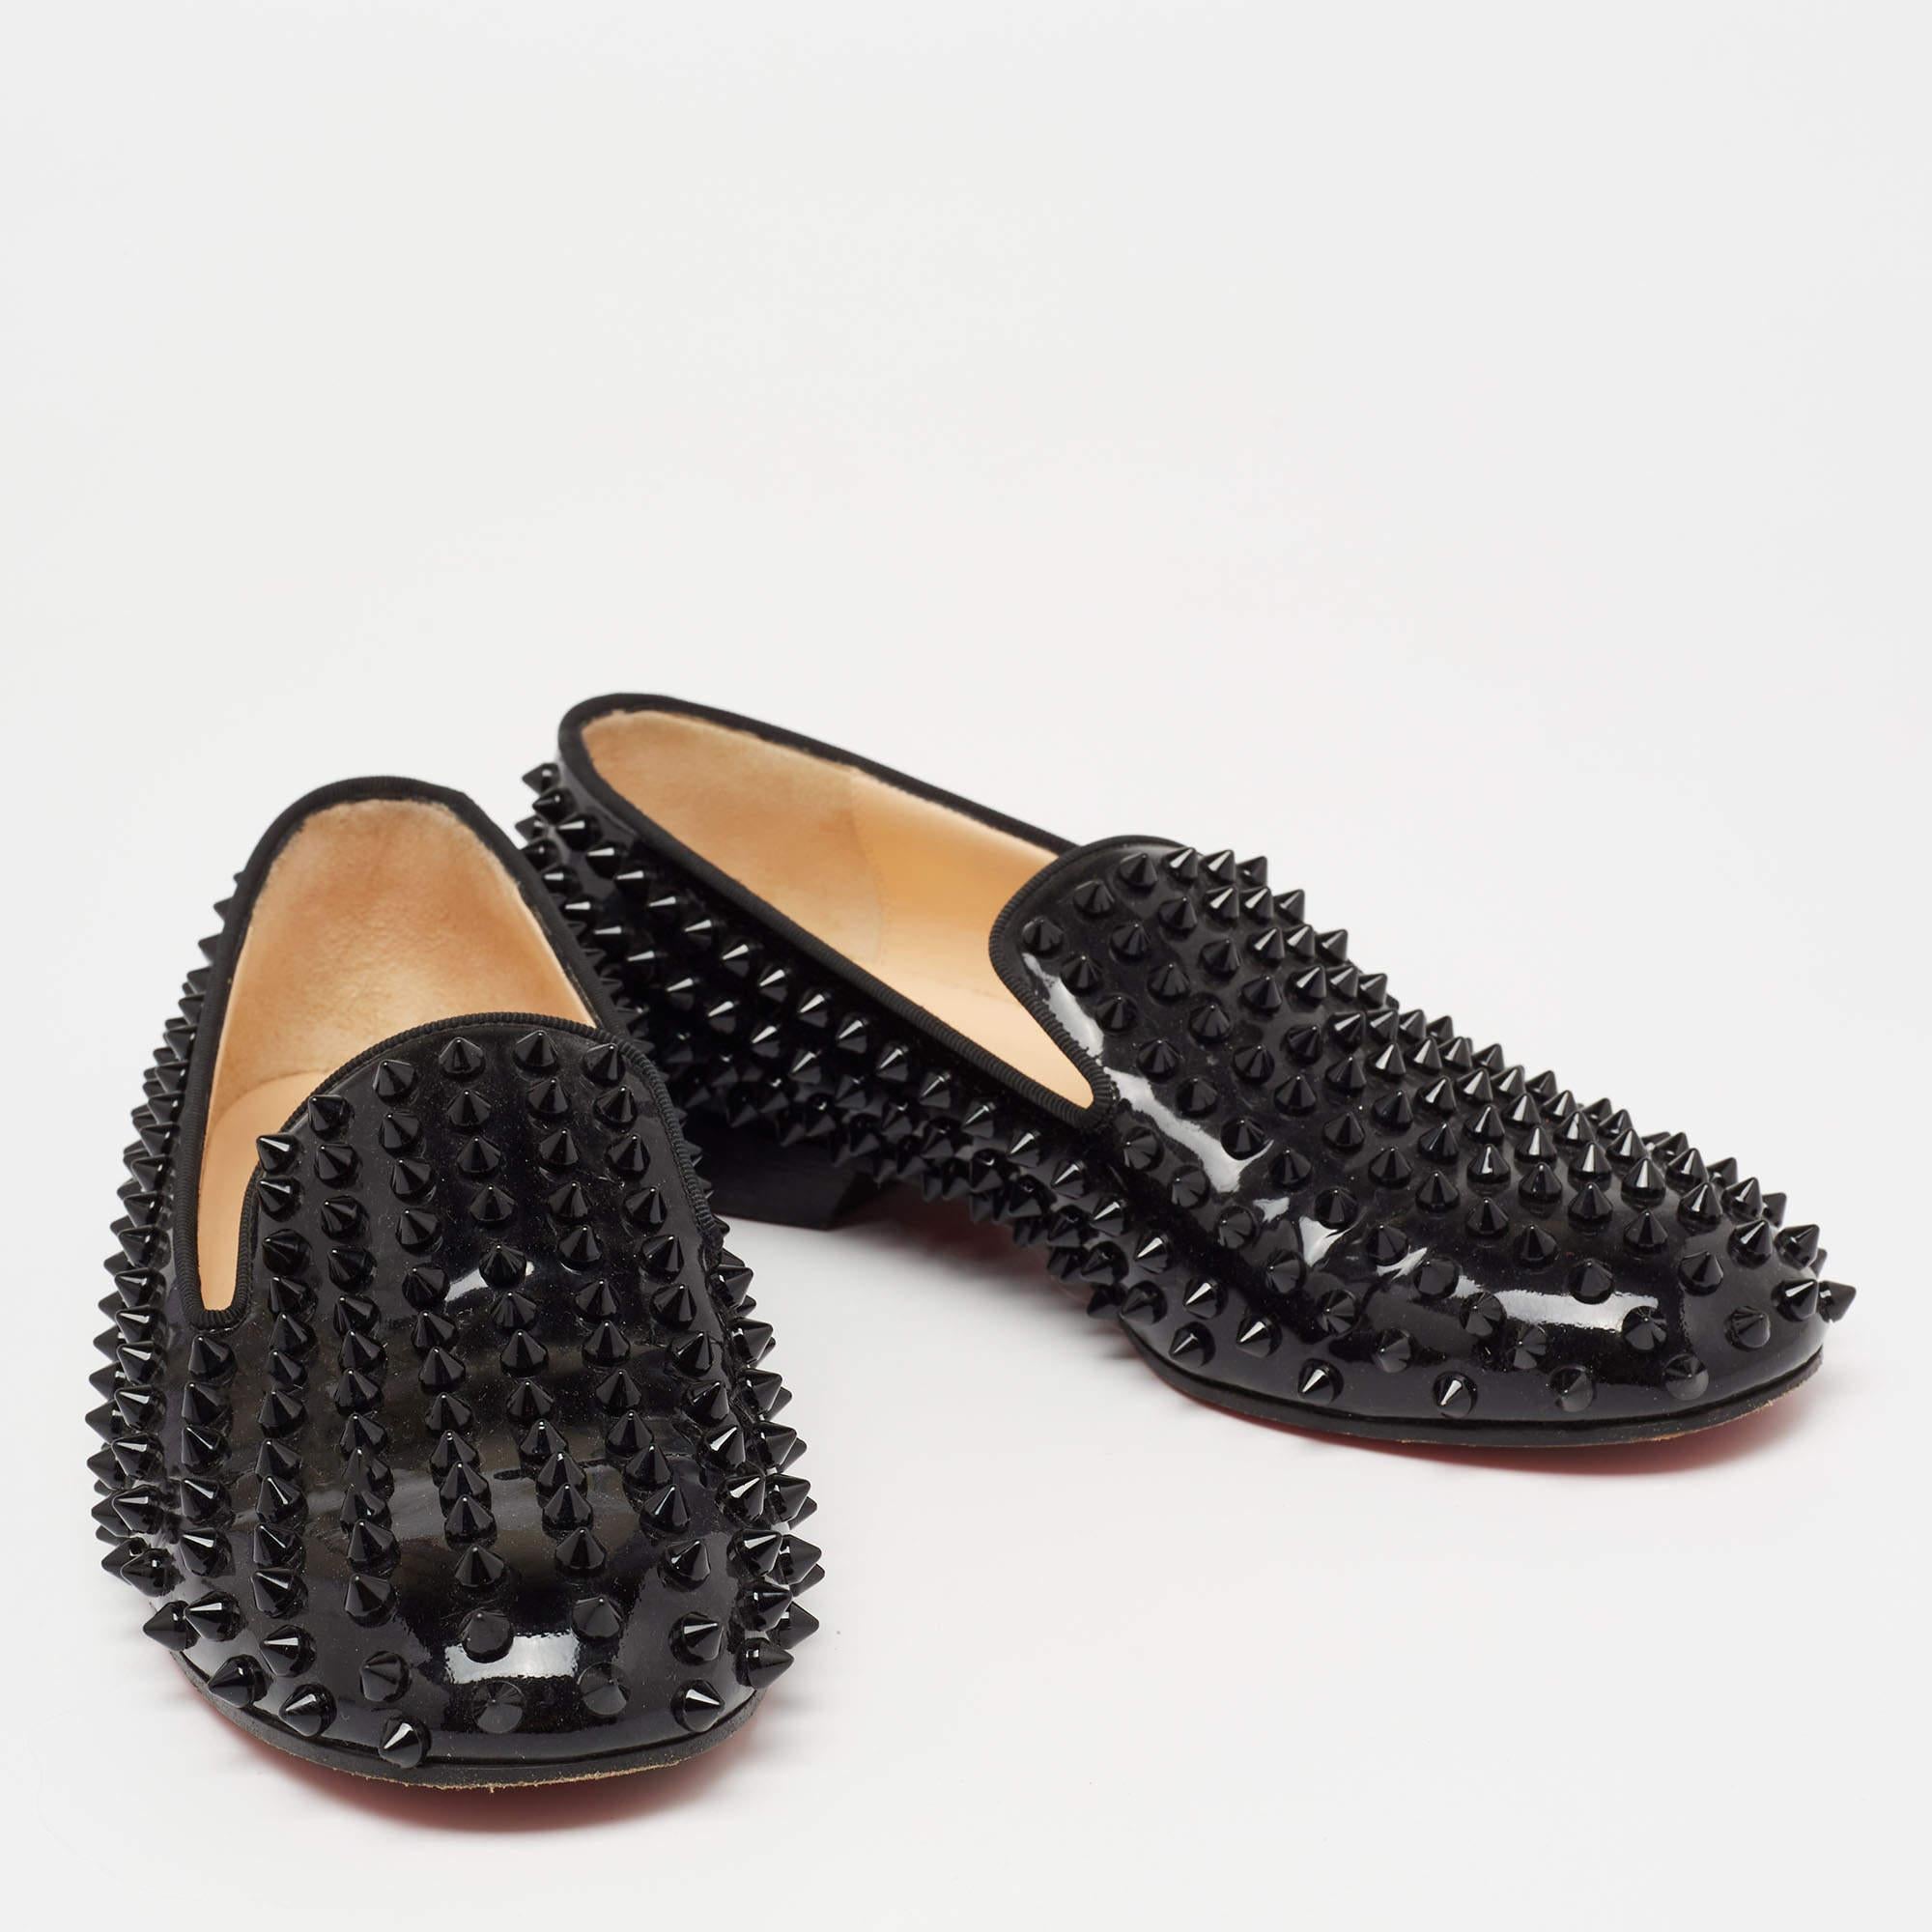 Black Christian Louboutin Patent Leather Dandelion Spikes Smoking Slippers Size 37 For Sale